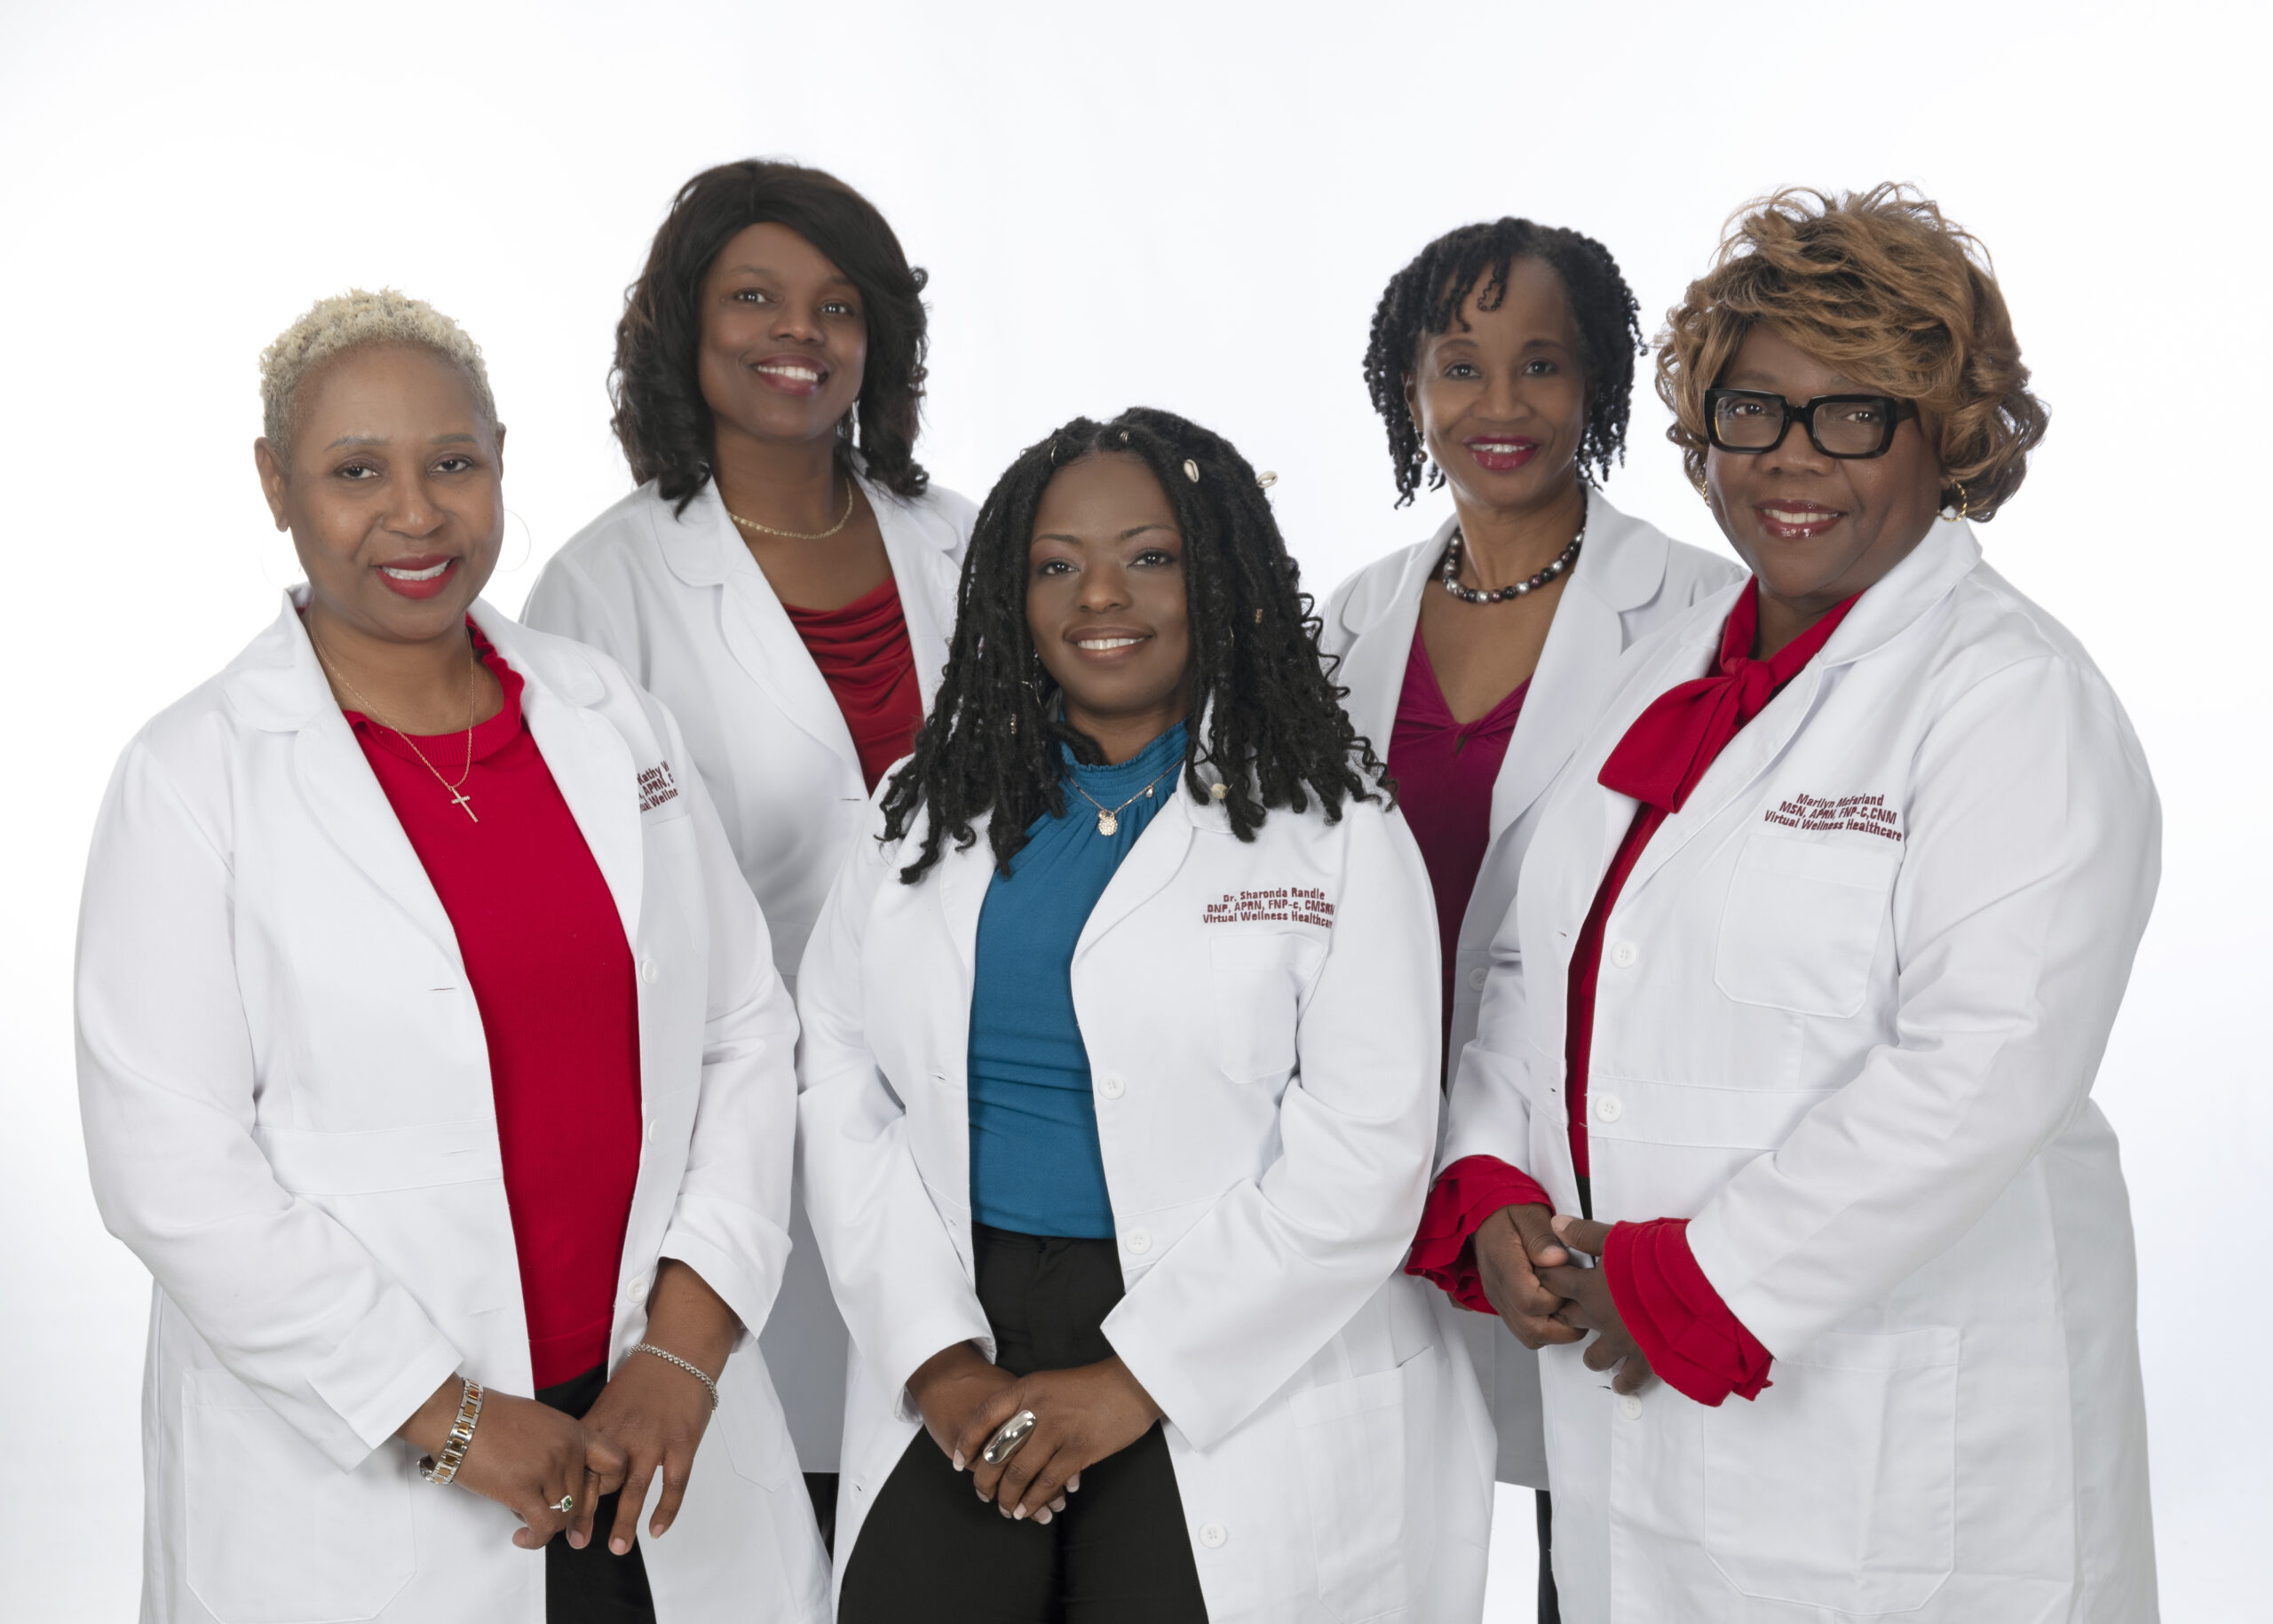 image of 5 nurse practitioners